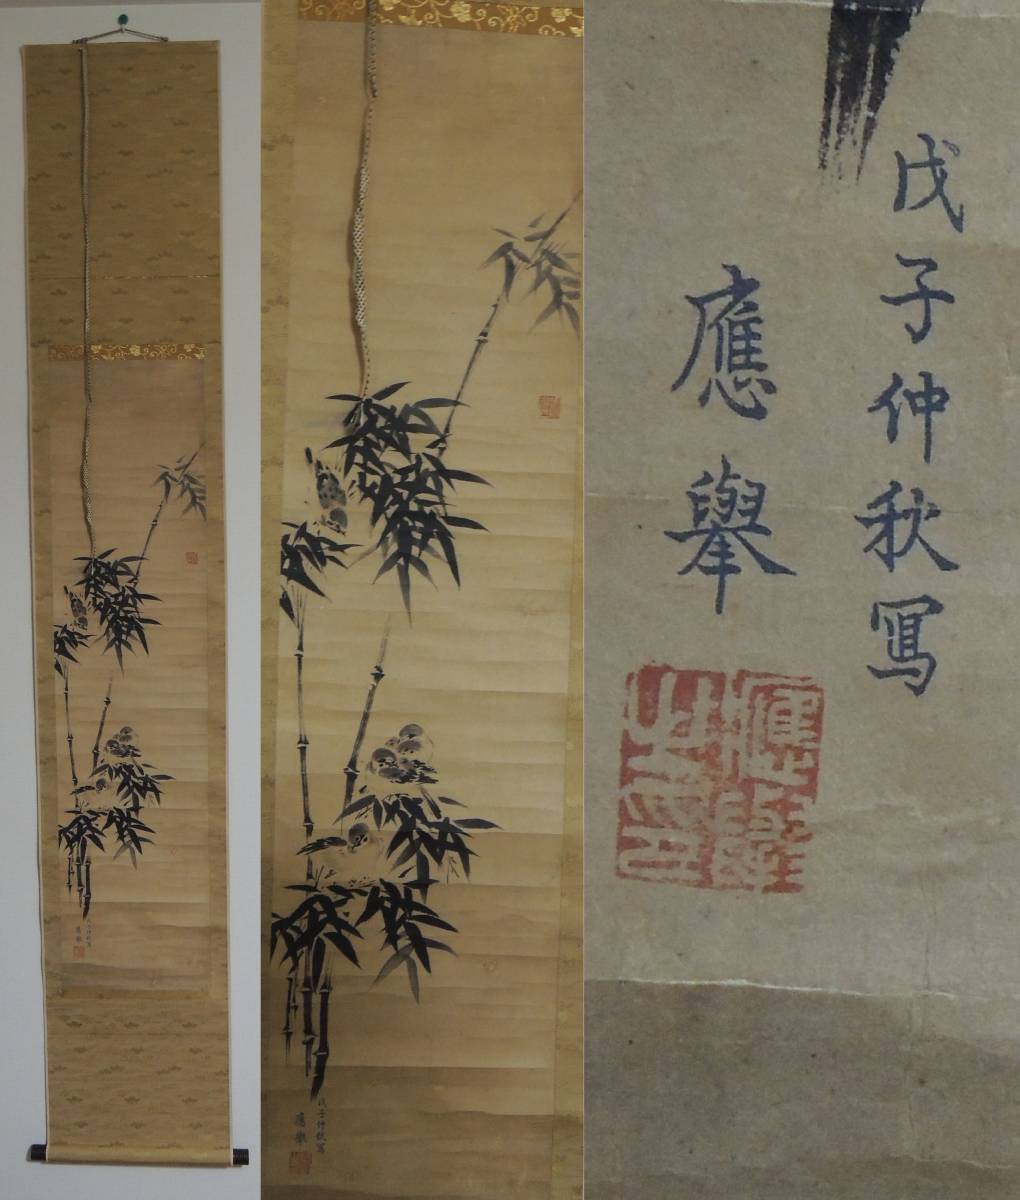 Painter of the Maruyama School, Maruyama Okyo, Bamboo and Birds, Hanging Scroll, with Box, Painting, watercolor, Nature, Landscape painting